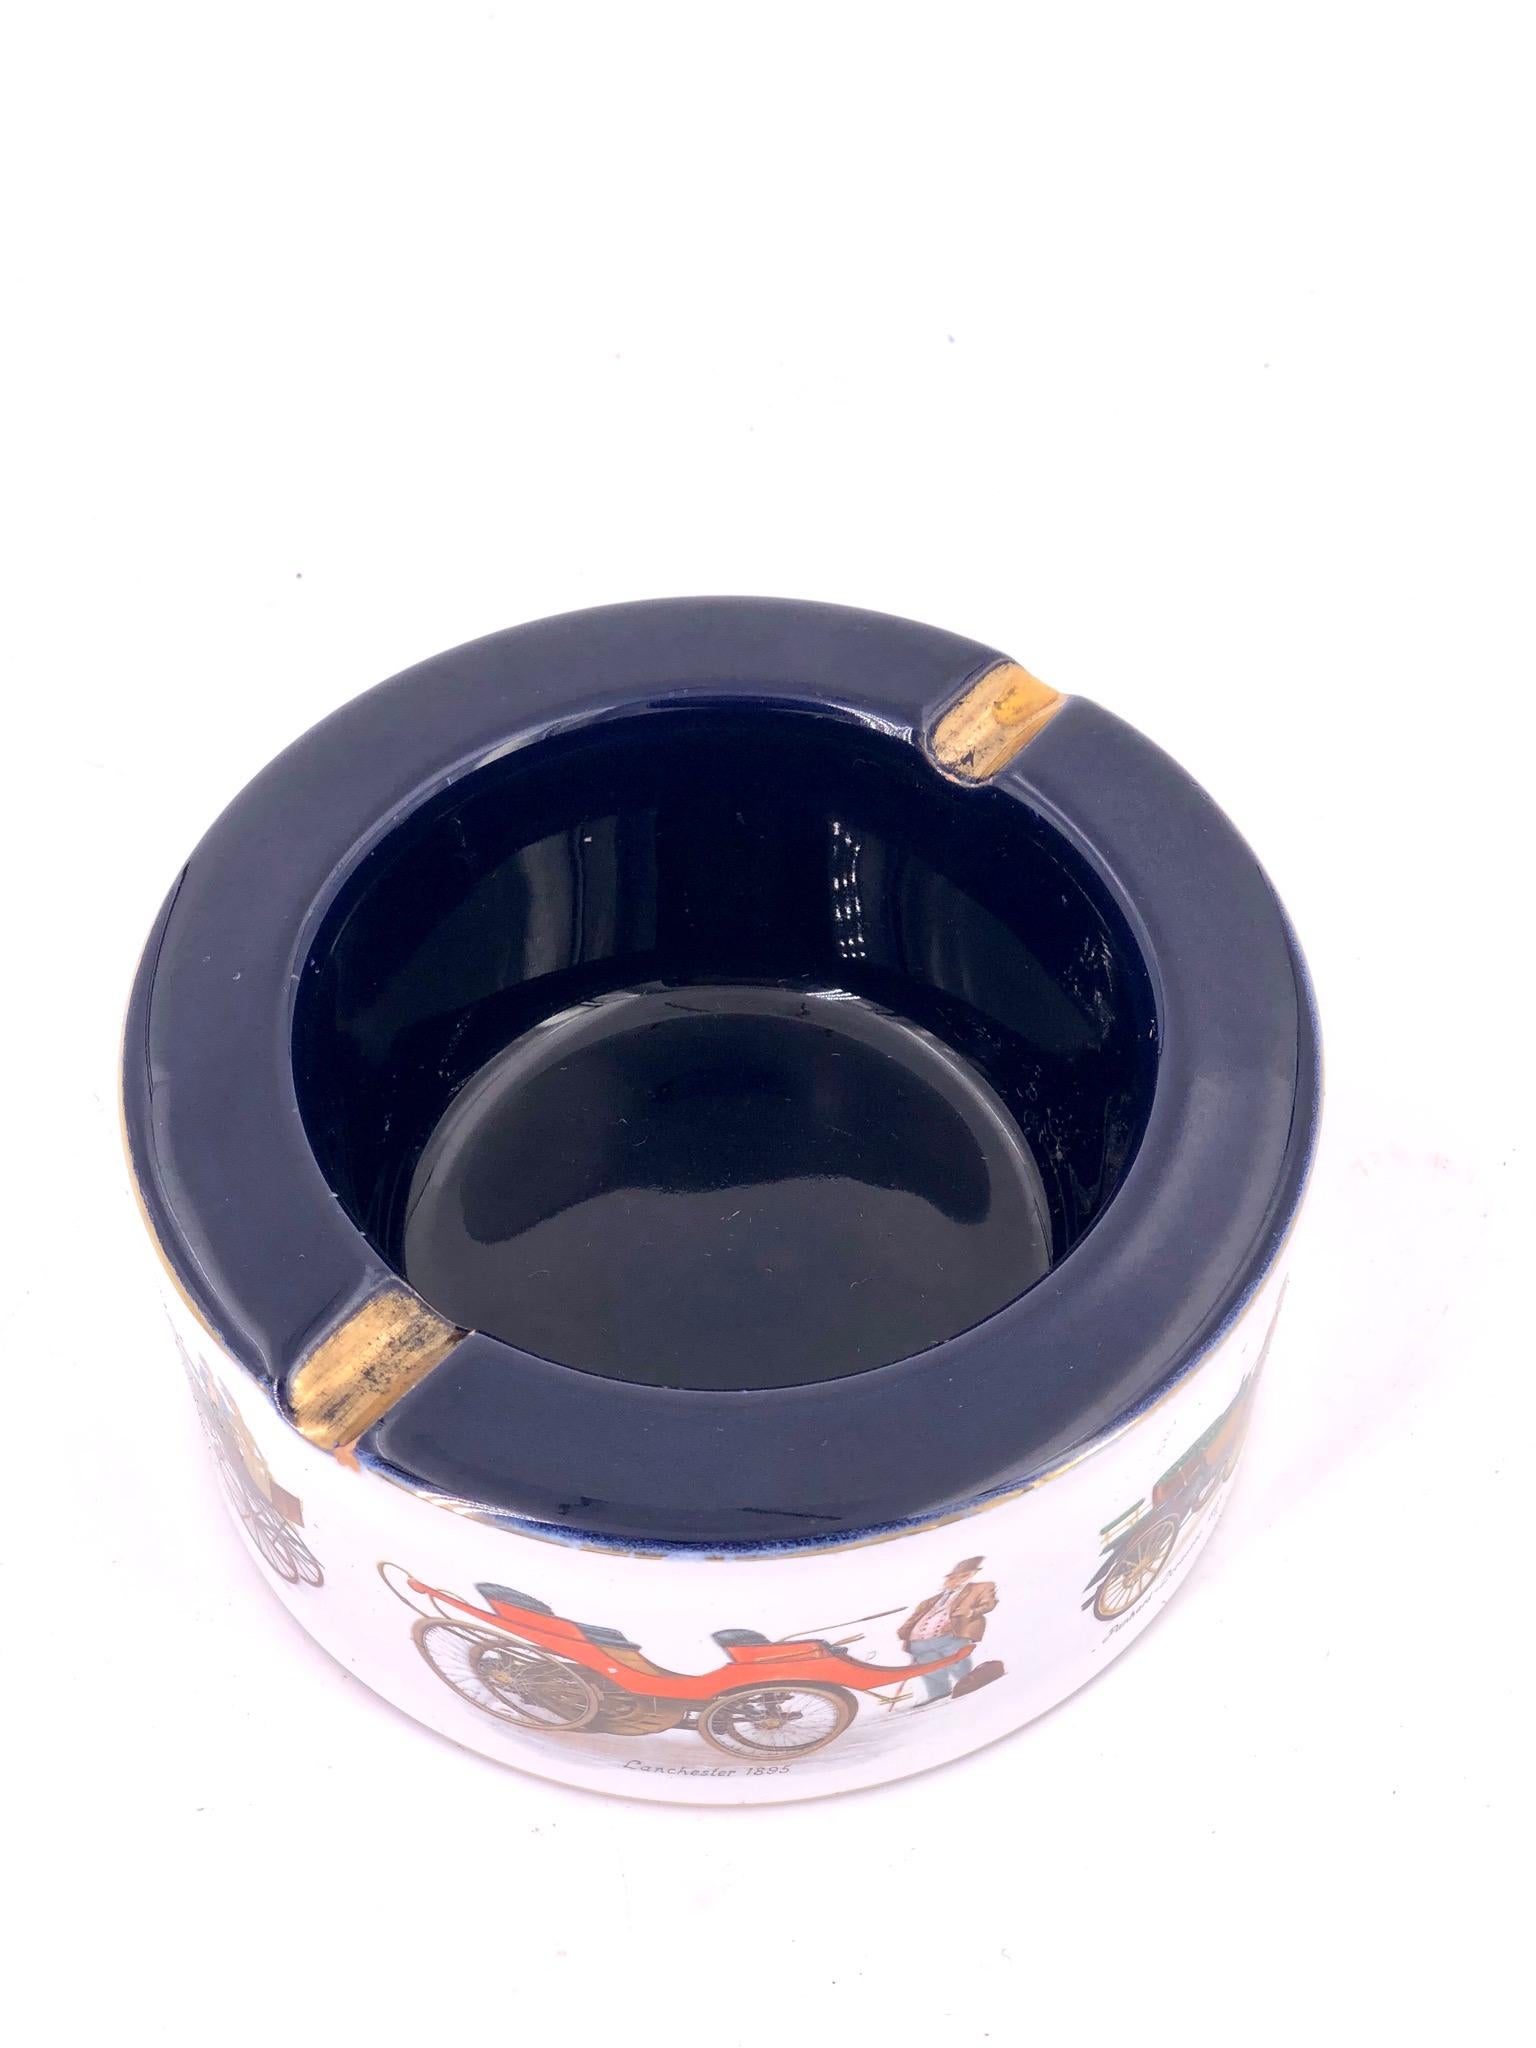 Italian Hand Painted Porcelain Ashtray with Antique Cars & Gold Accents For Sale 1